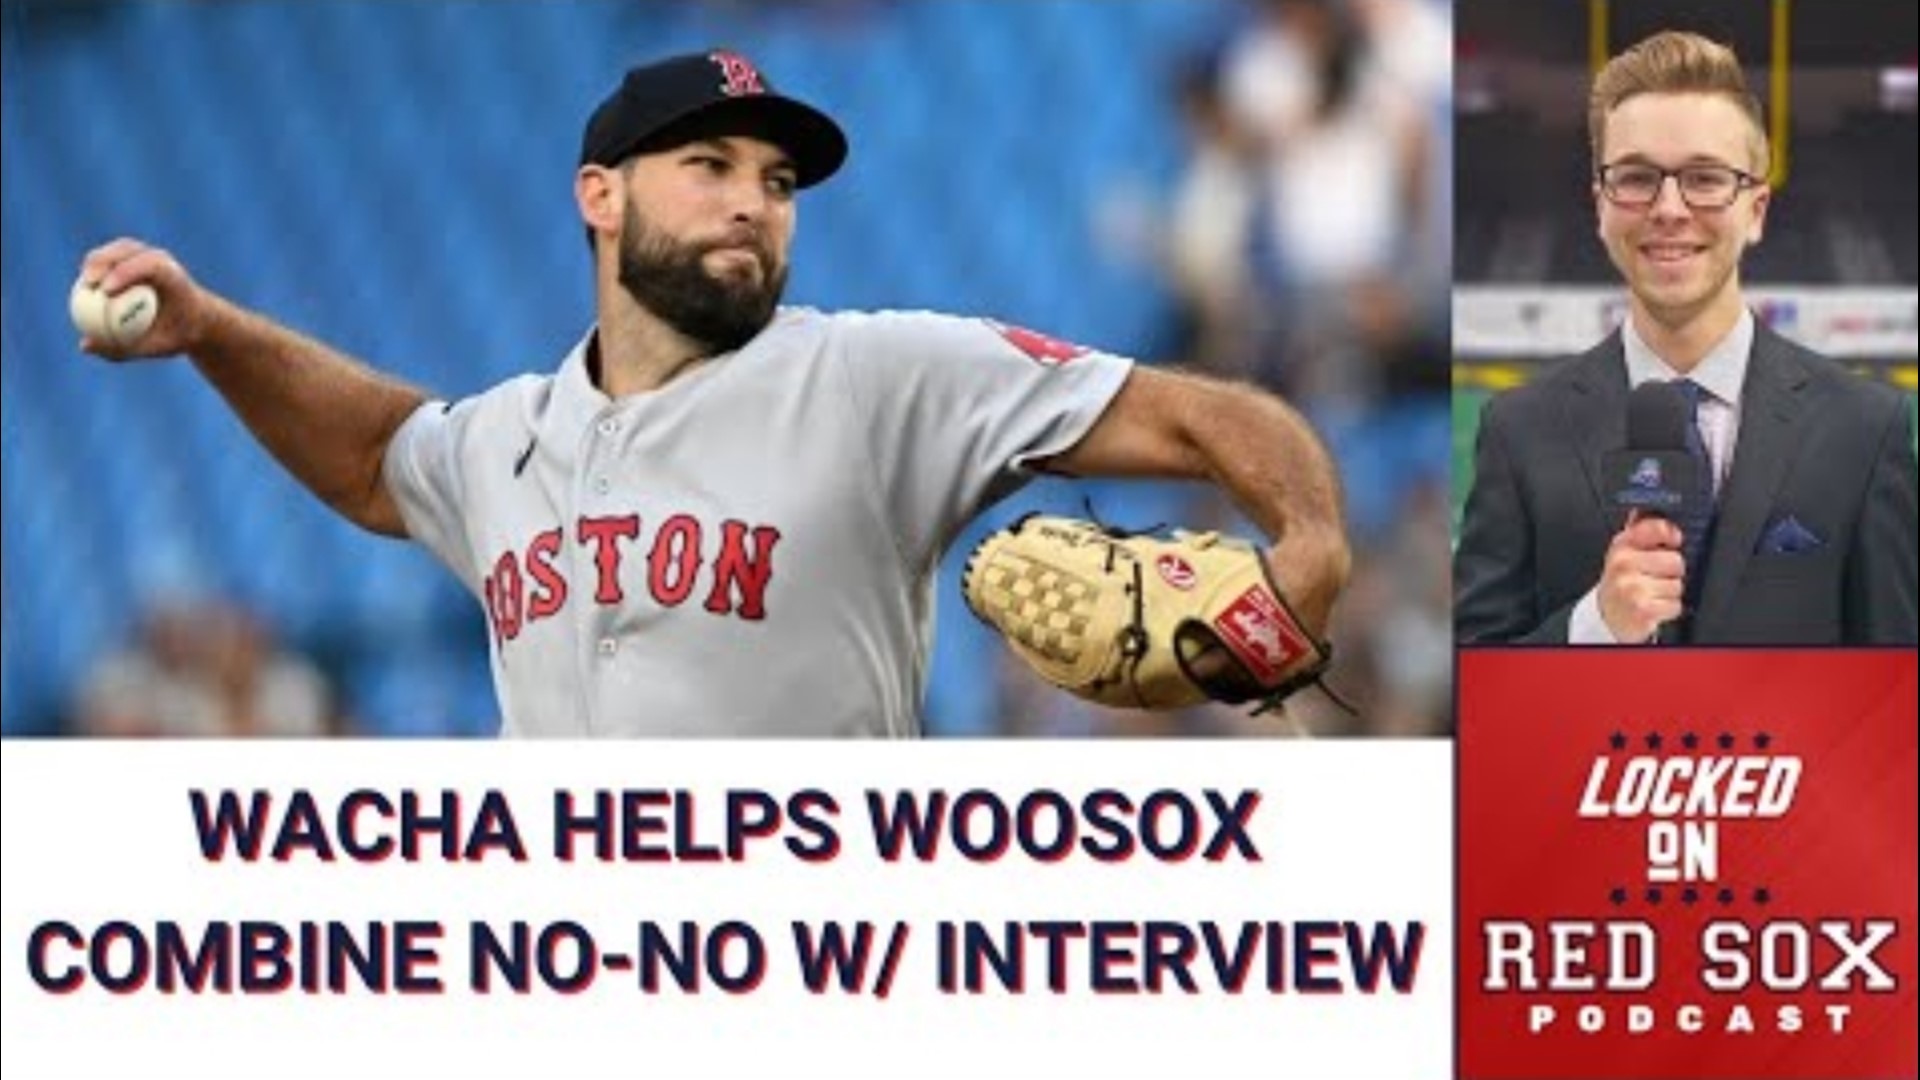 Michael Wacha started rehabbing from his right shoulder injury on Thursday night in Worcester and threw a masterful performance.